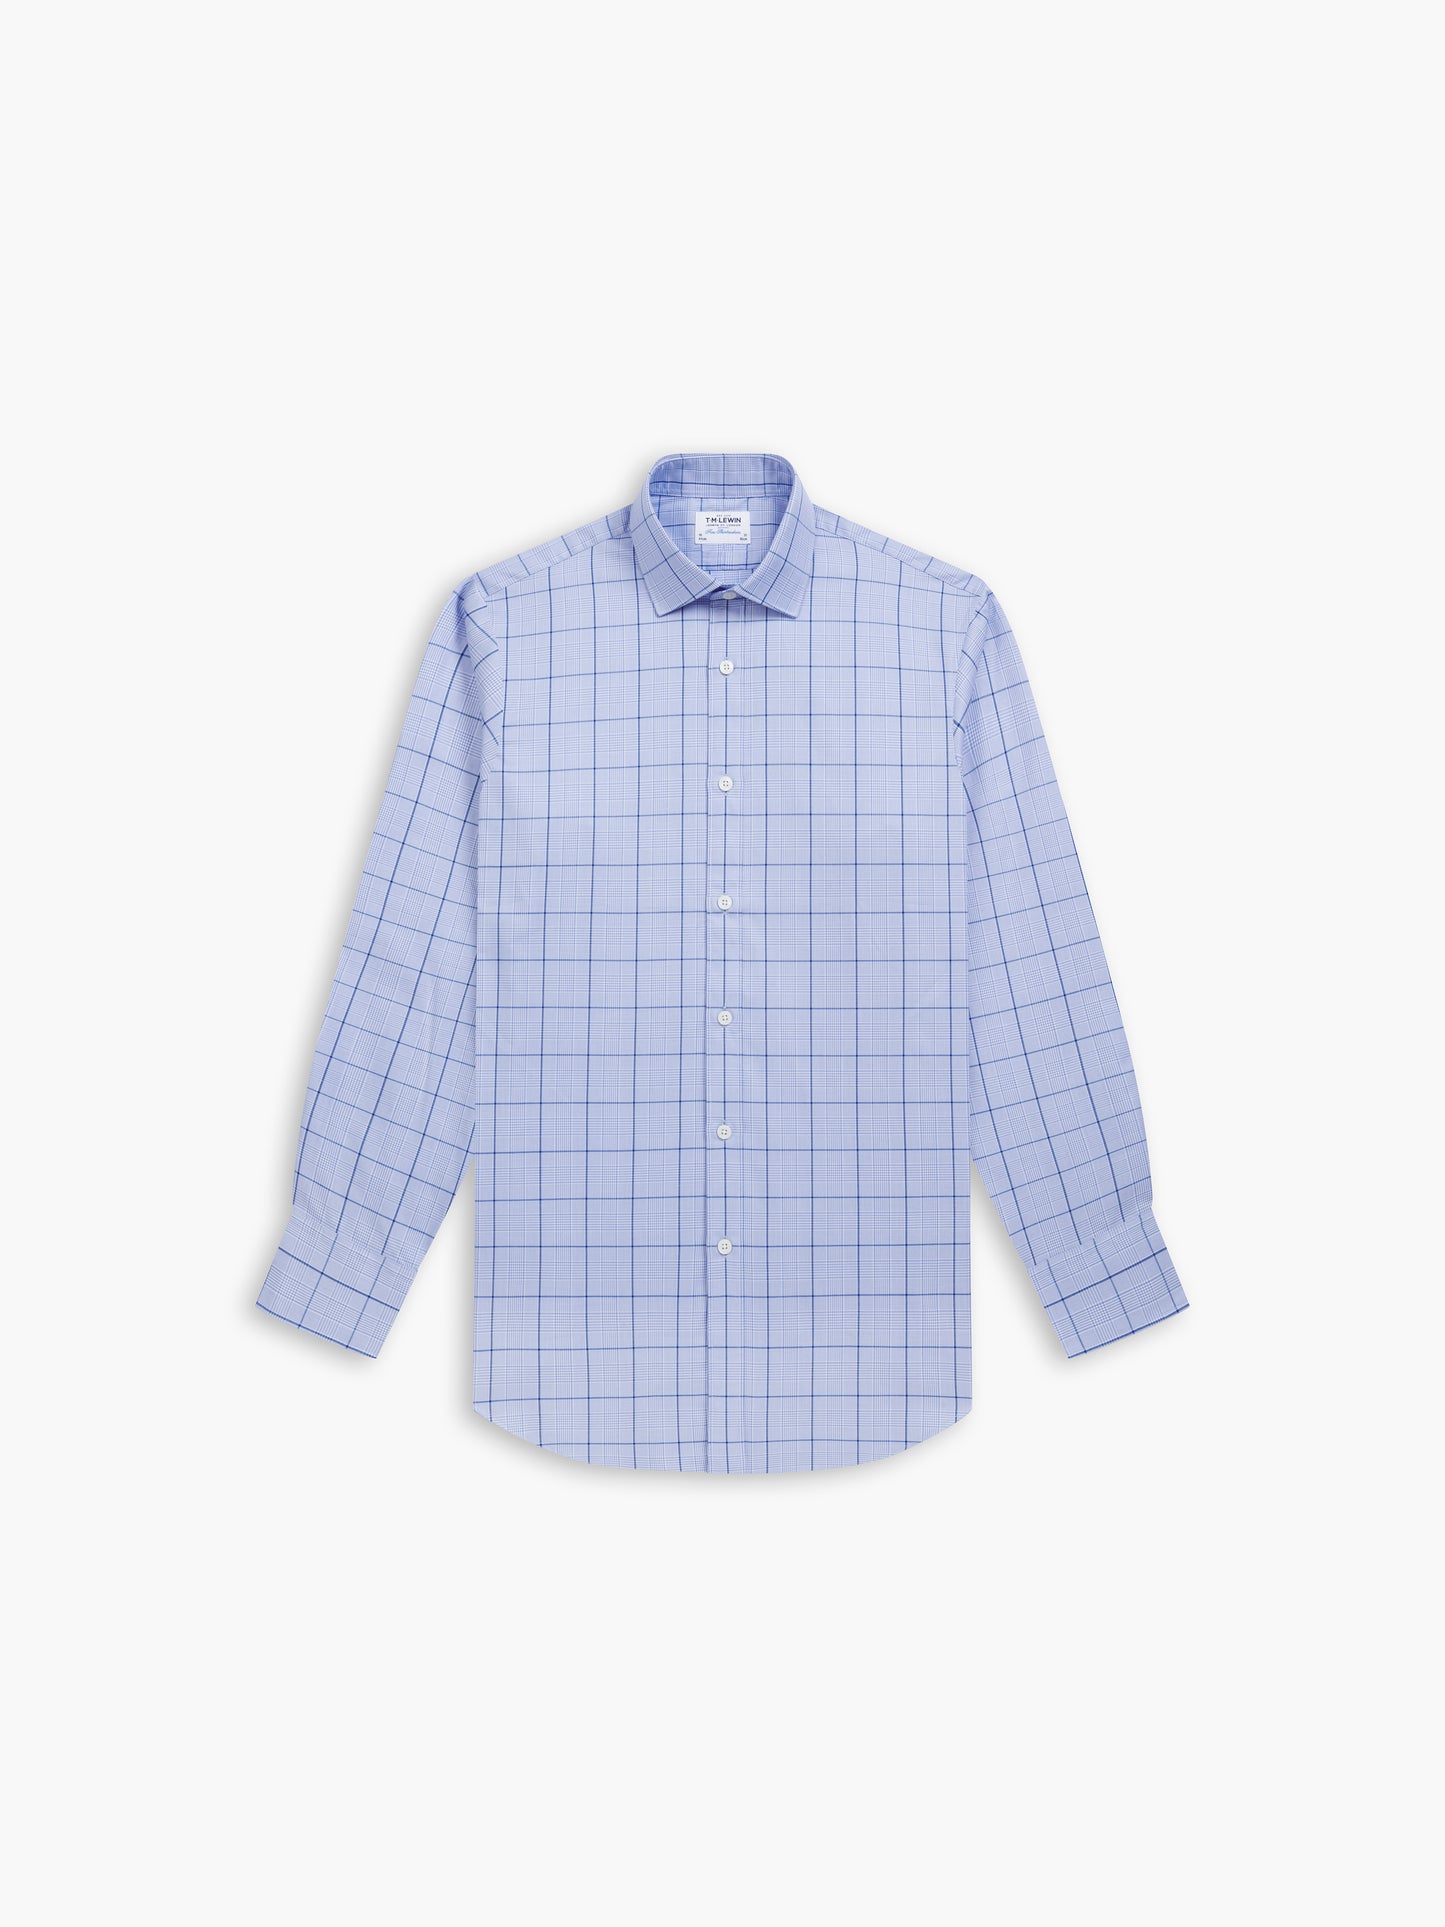 Navy Blue POW Check Twill Fitted Single Cuff Classic Collar Shirt